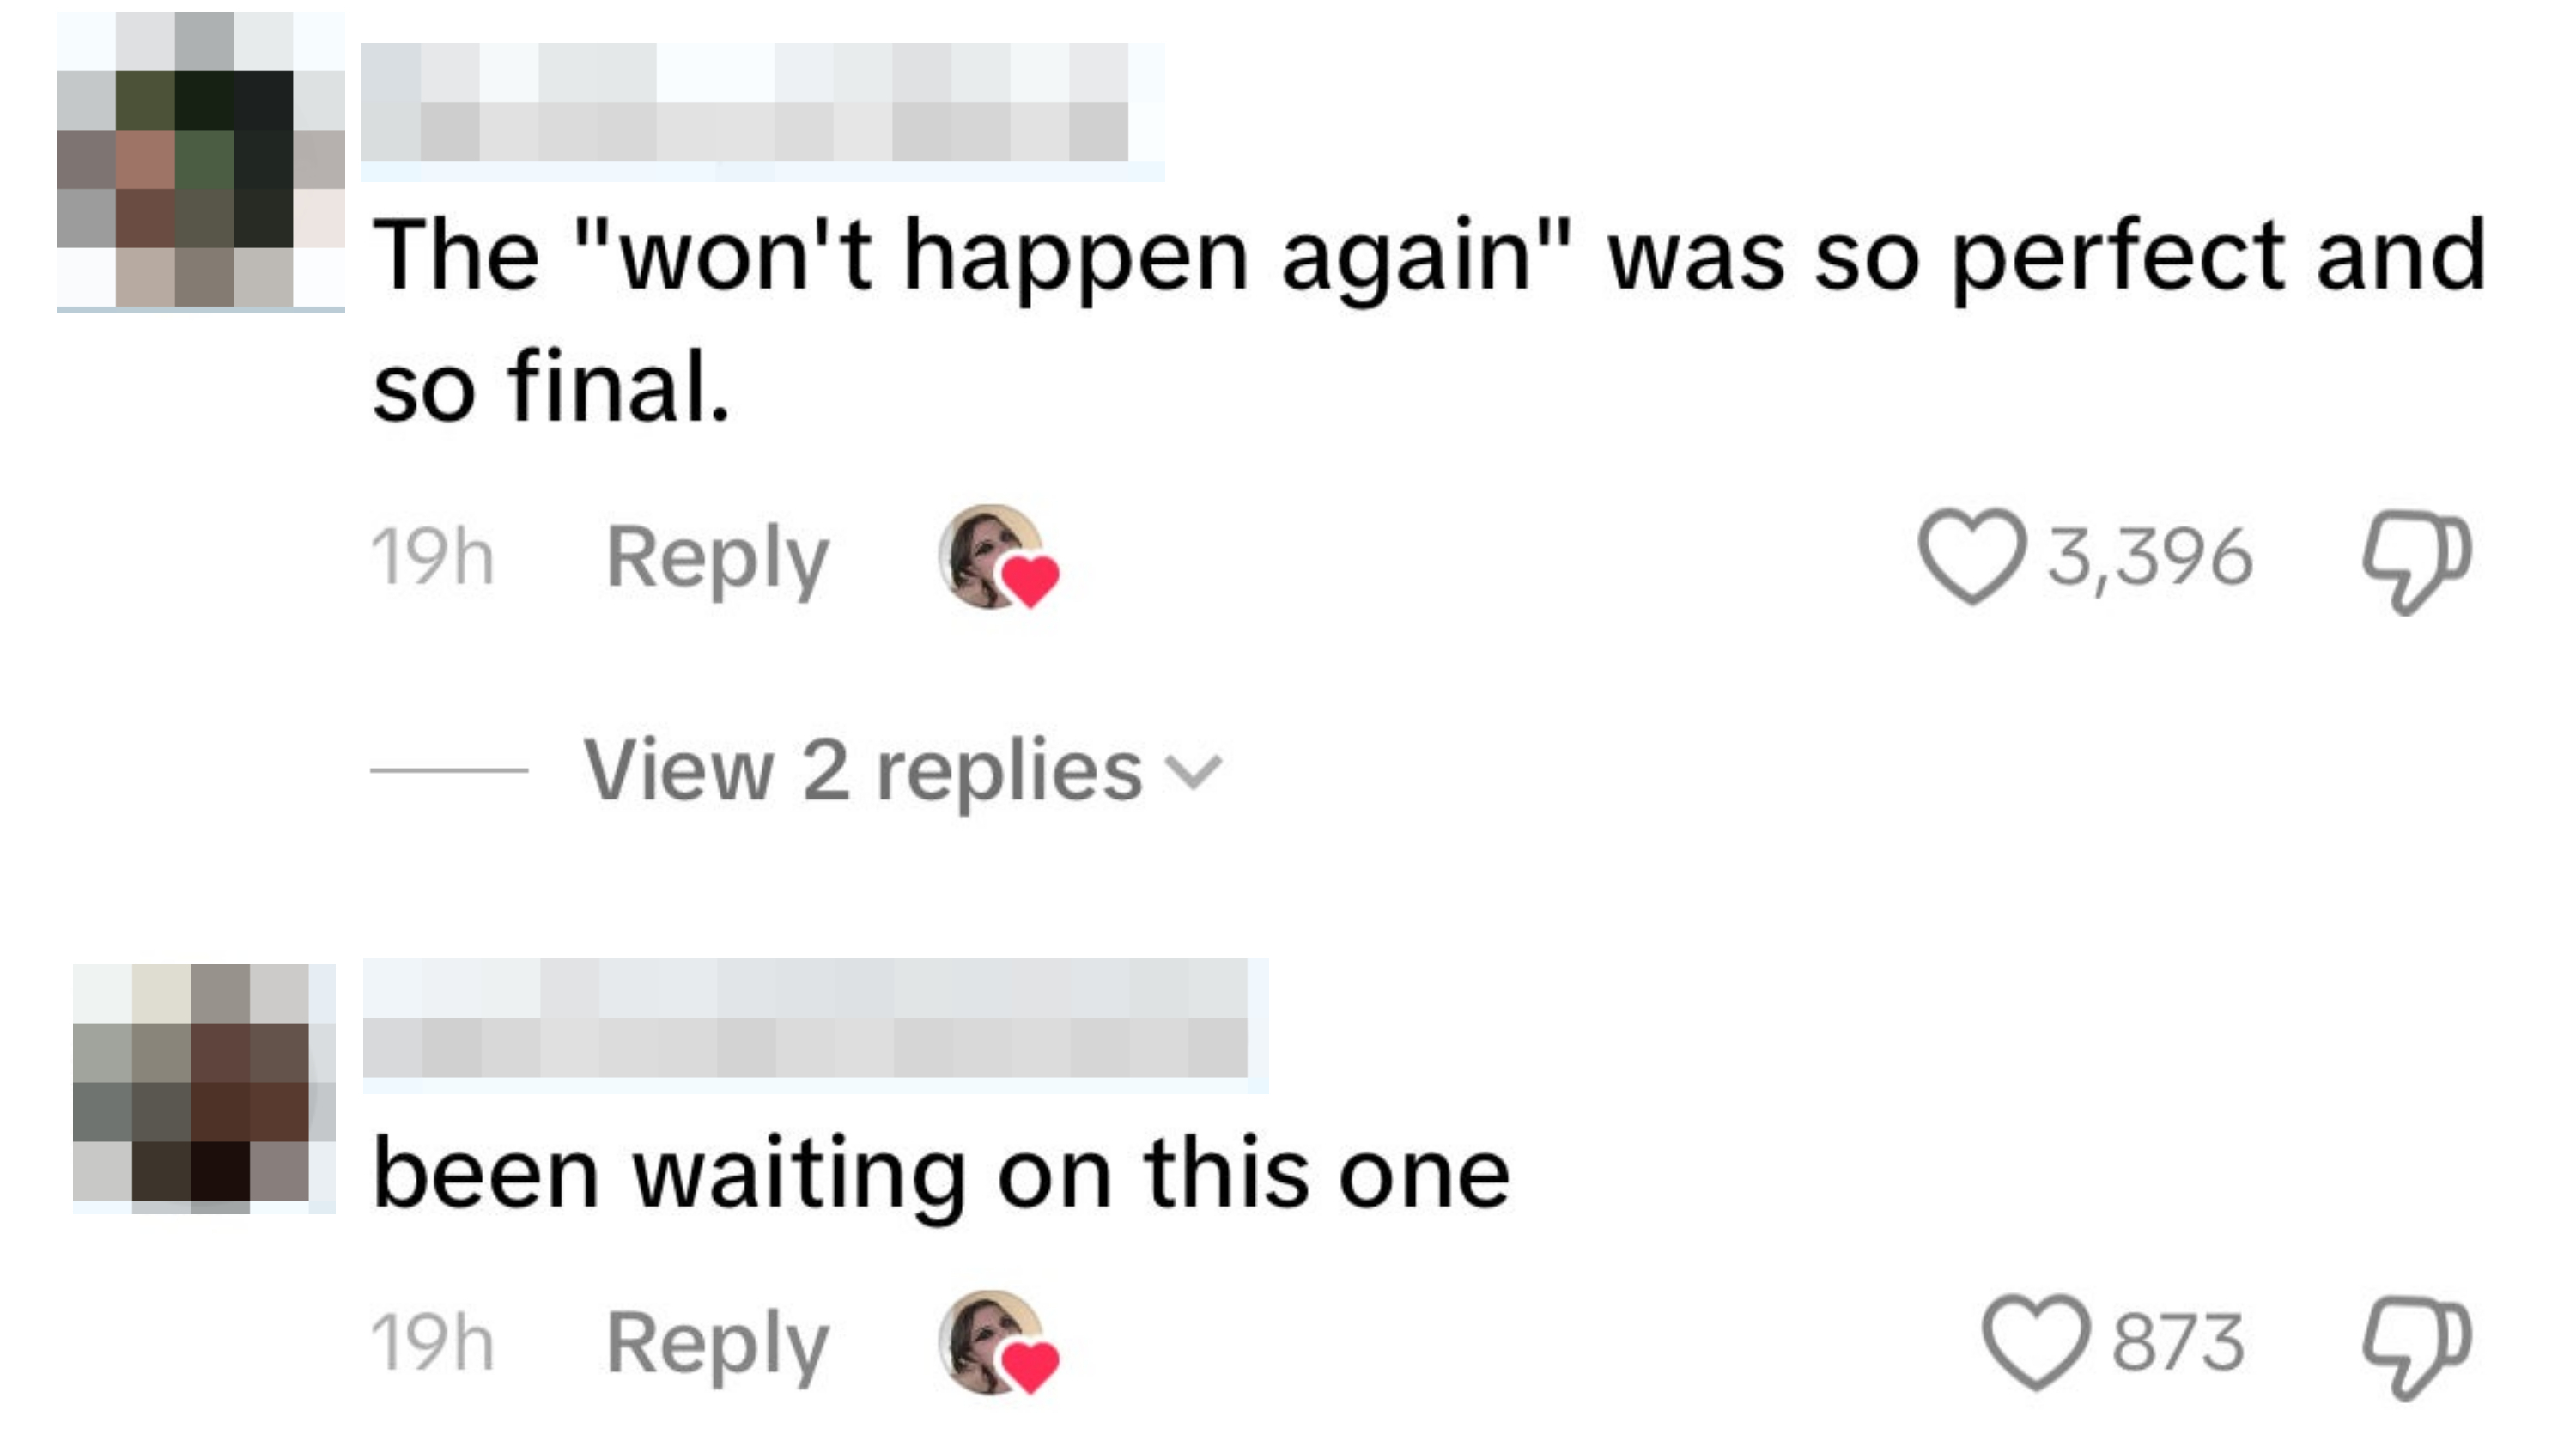 Two comments: The Abstract Witch&#x27;s comment says &#x27;The &quot;won&#x27;t happen again&quot; was so perfect and so final&#x27;